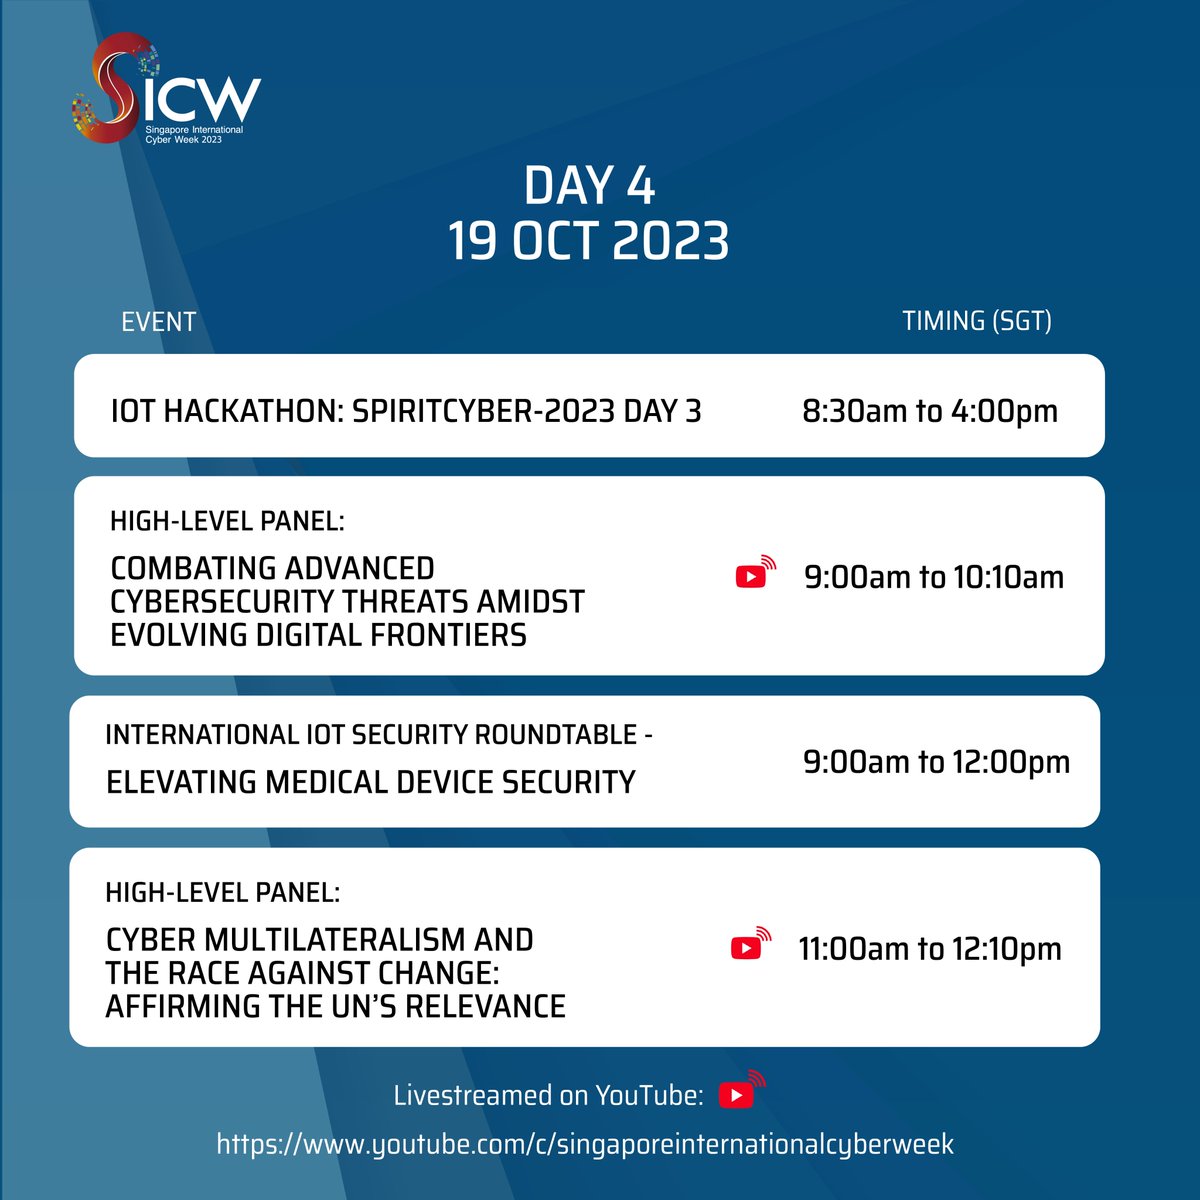 Here’s a quick preview of what you can expect on the last day of #SICW2023!